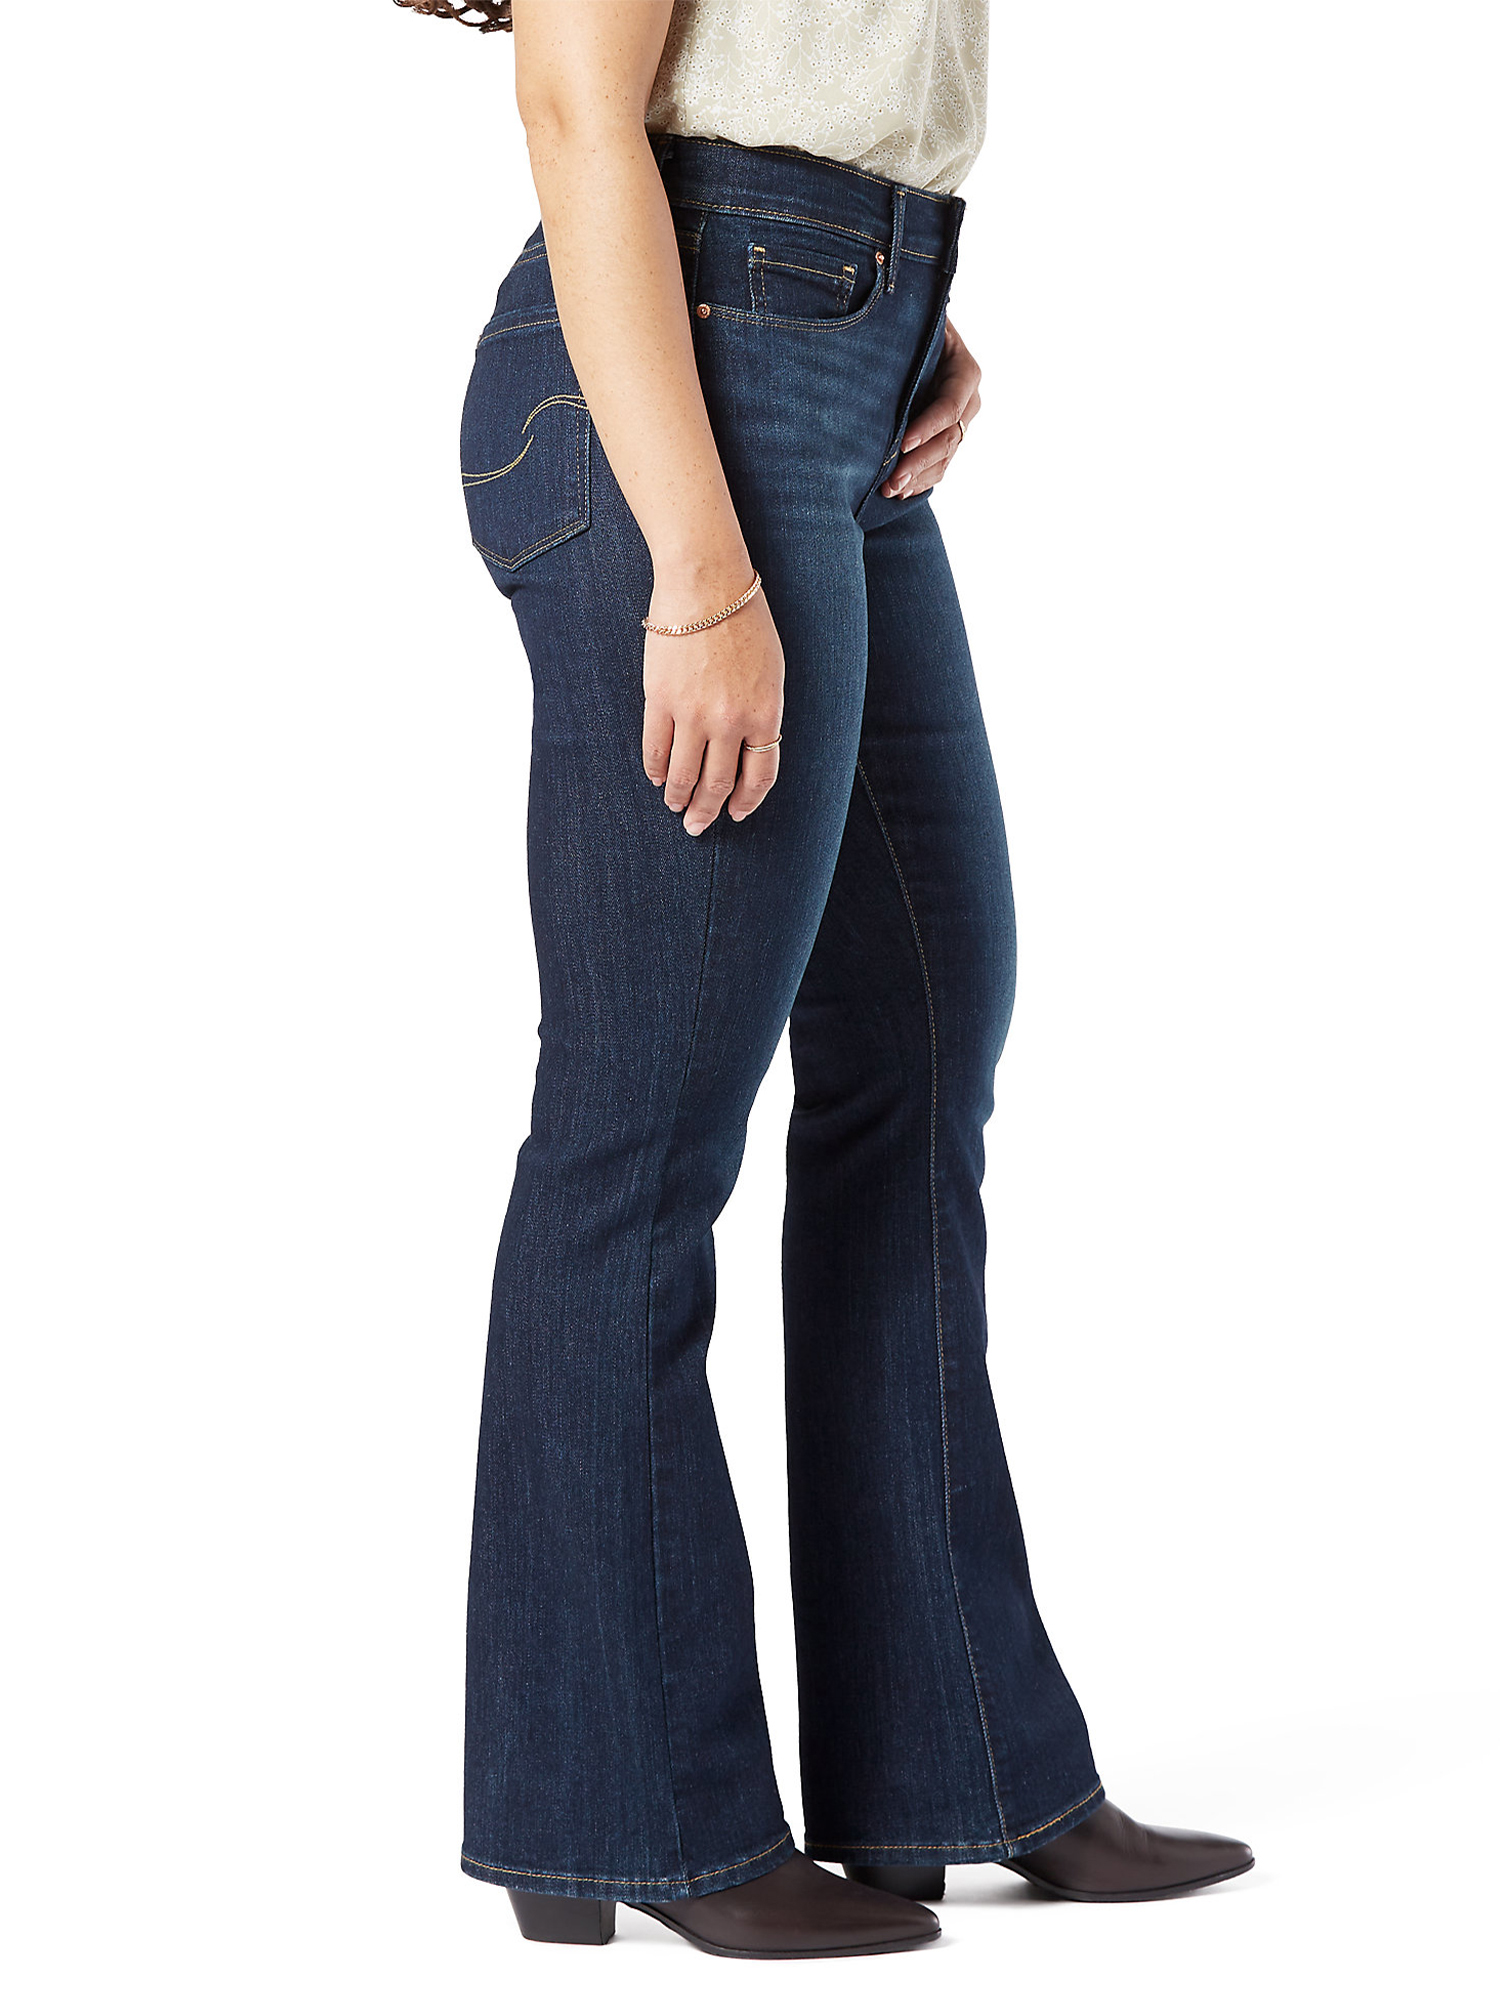 Signature by Levi Strauss & Co. Women's and Women's Plus Modern Bootcut Jeans - image 2 of 5